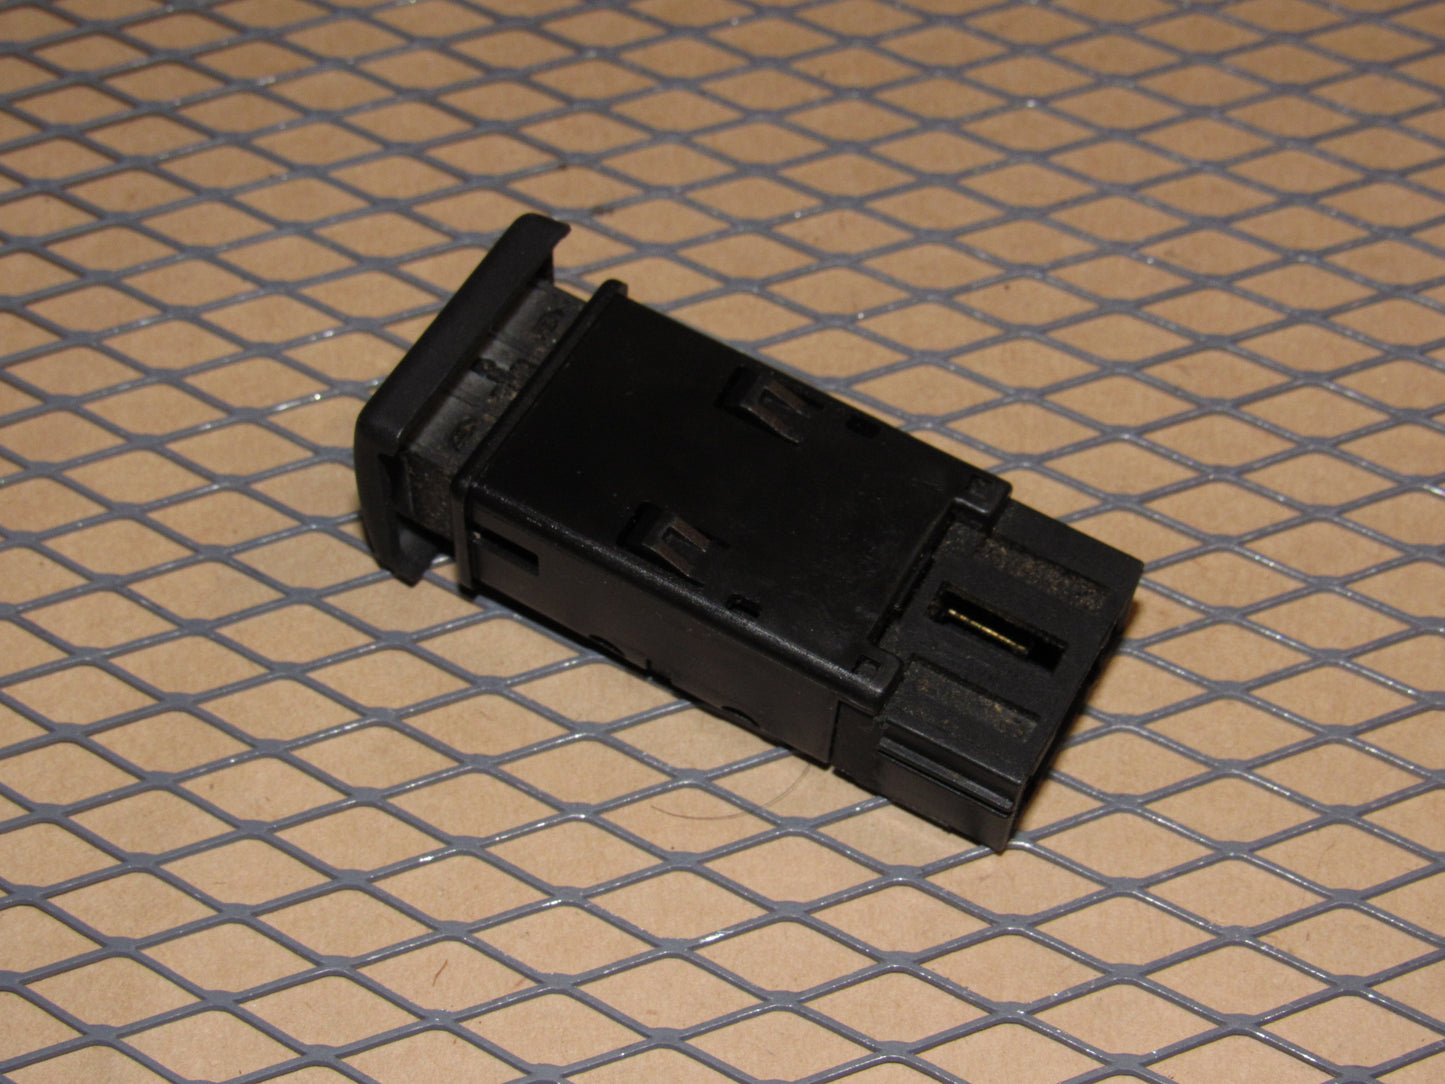 03 04 Land Rover Discovery OEM Flasher Hazard Light Switch